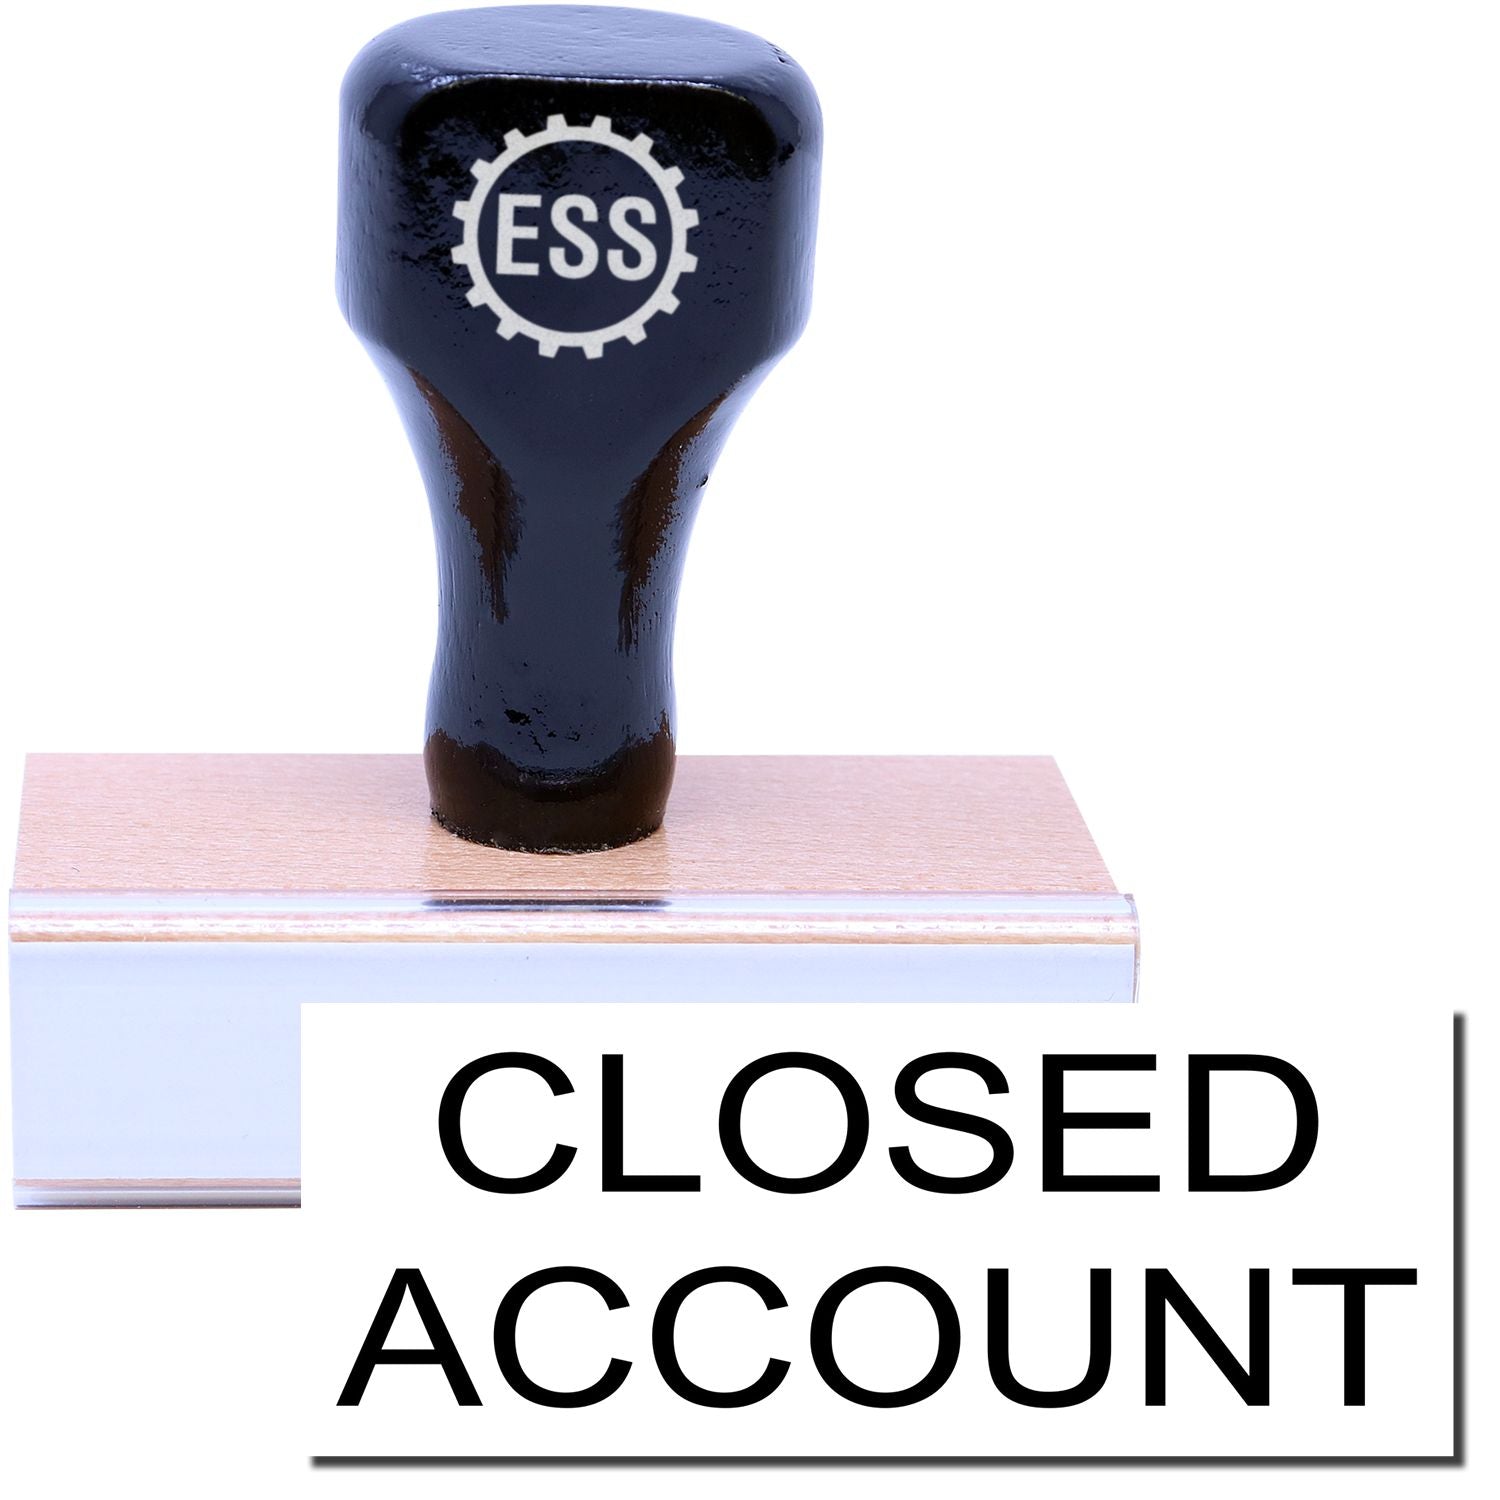 A stock office rubber stamp with a stamped image showing how the text "CLOSED ACCOUNT" is displayed after stamping.